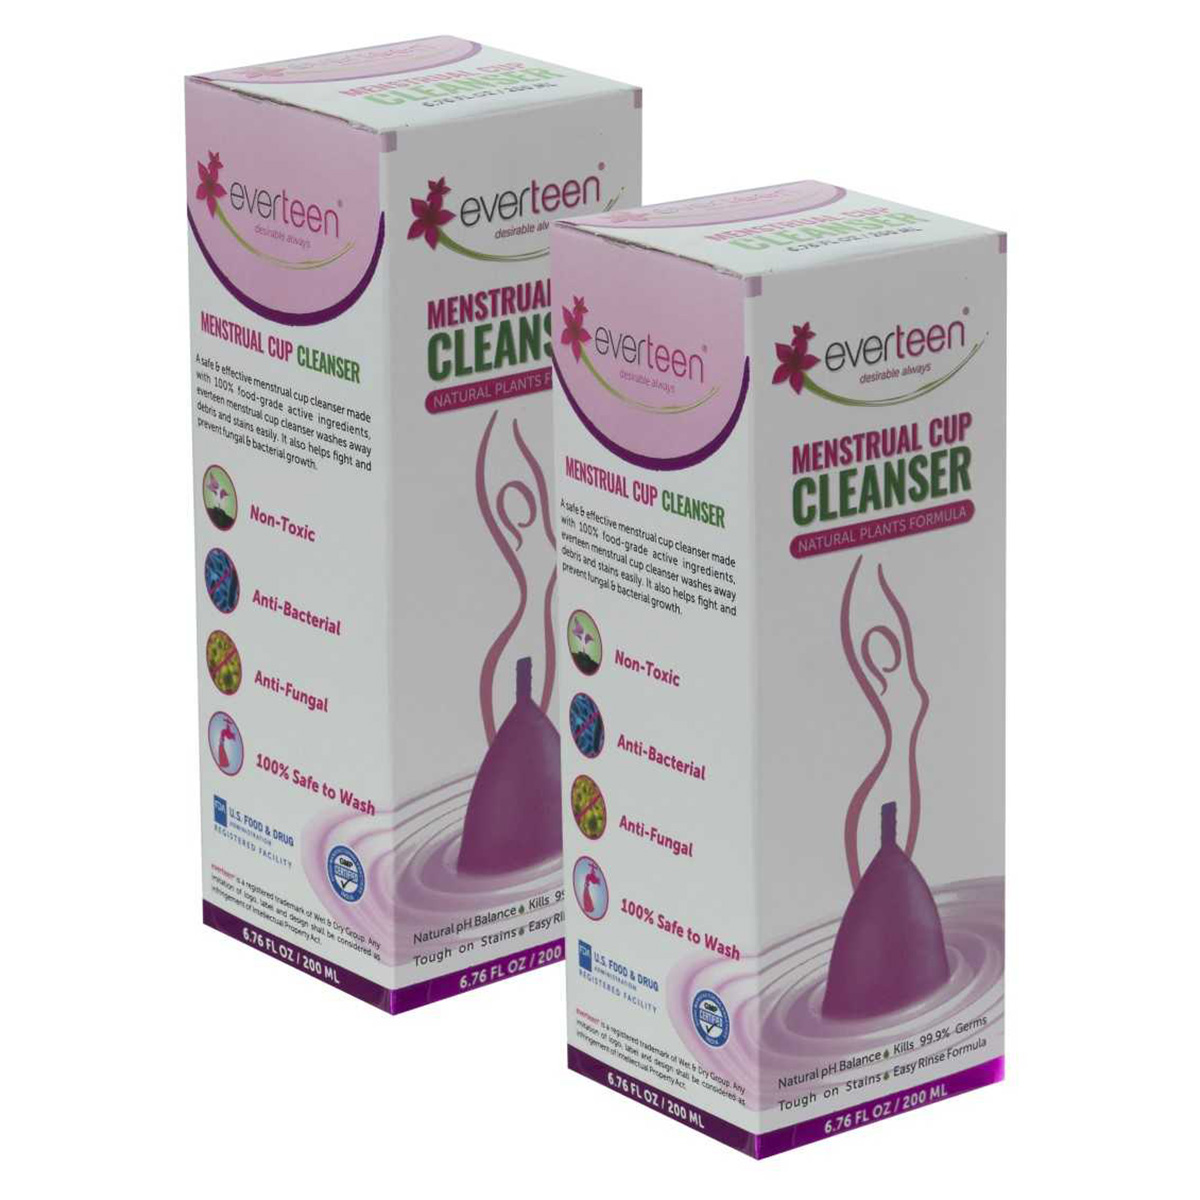 everteen Menstrual Cup Cleanser With Plants Based Formula For Women, 200ml-Pack of 2